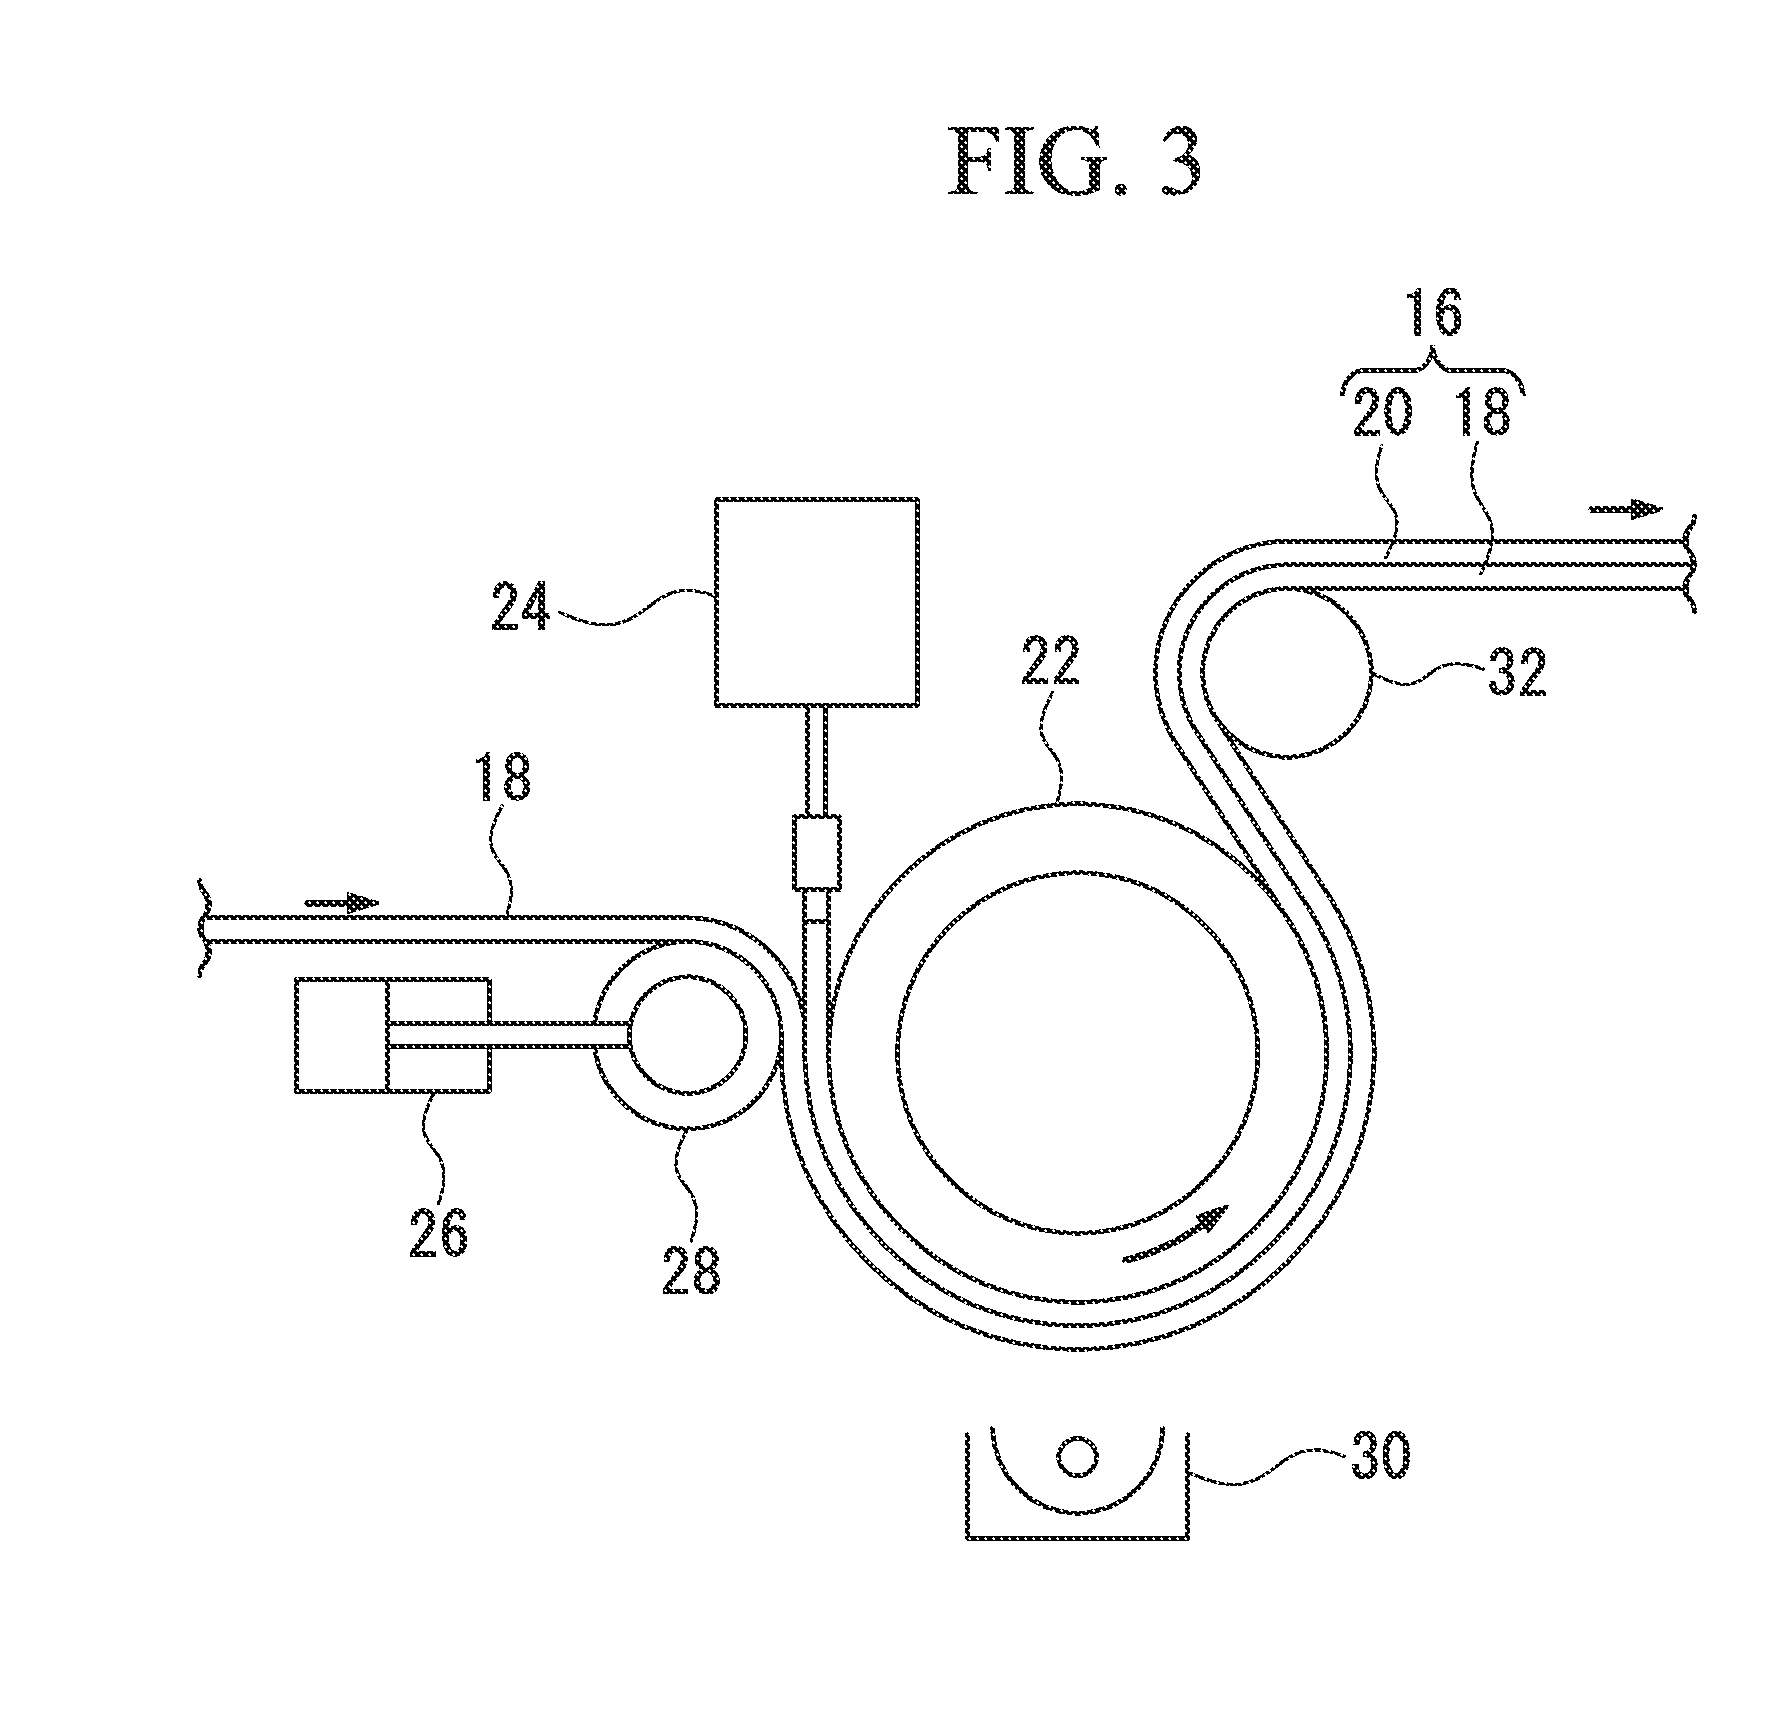 Antireflection article and display device